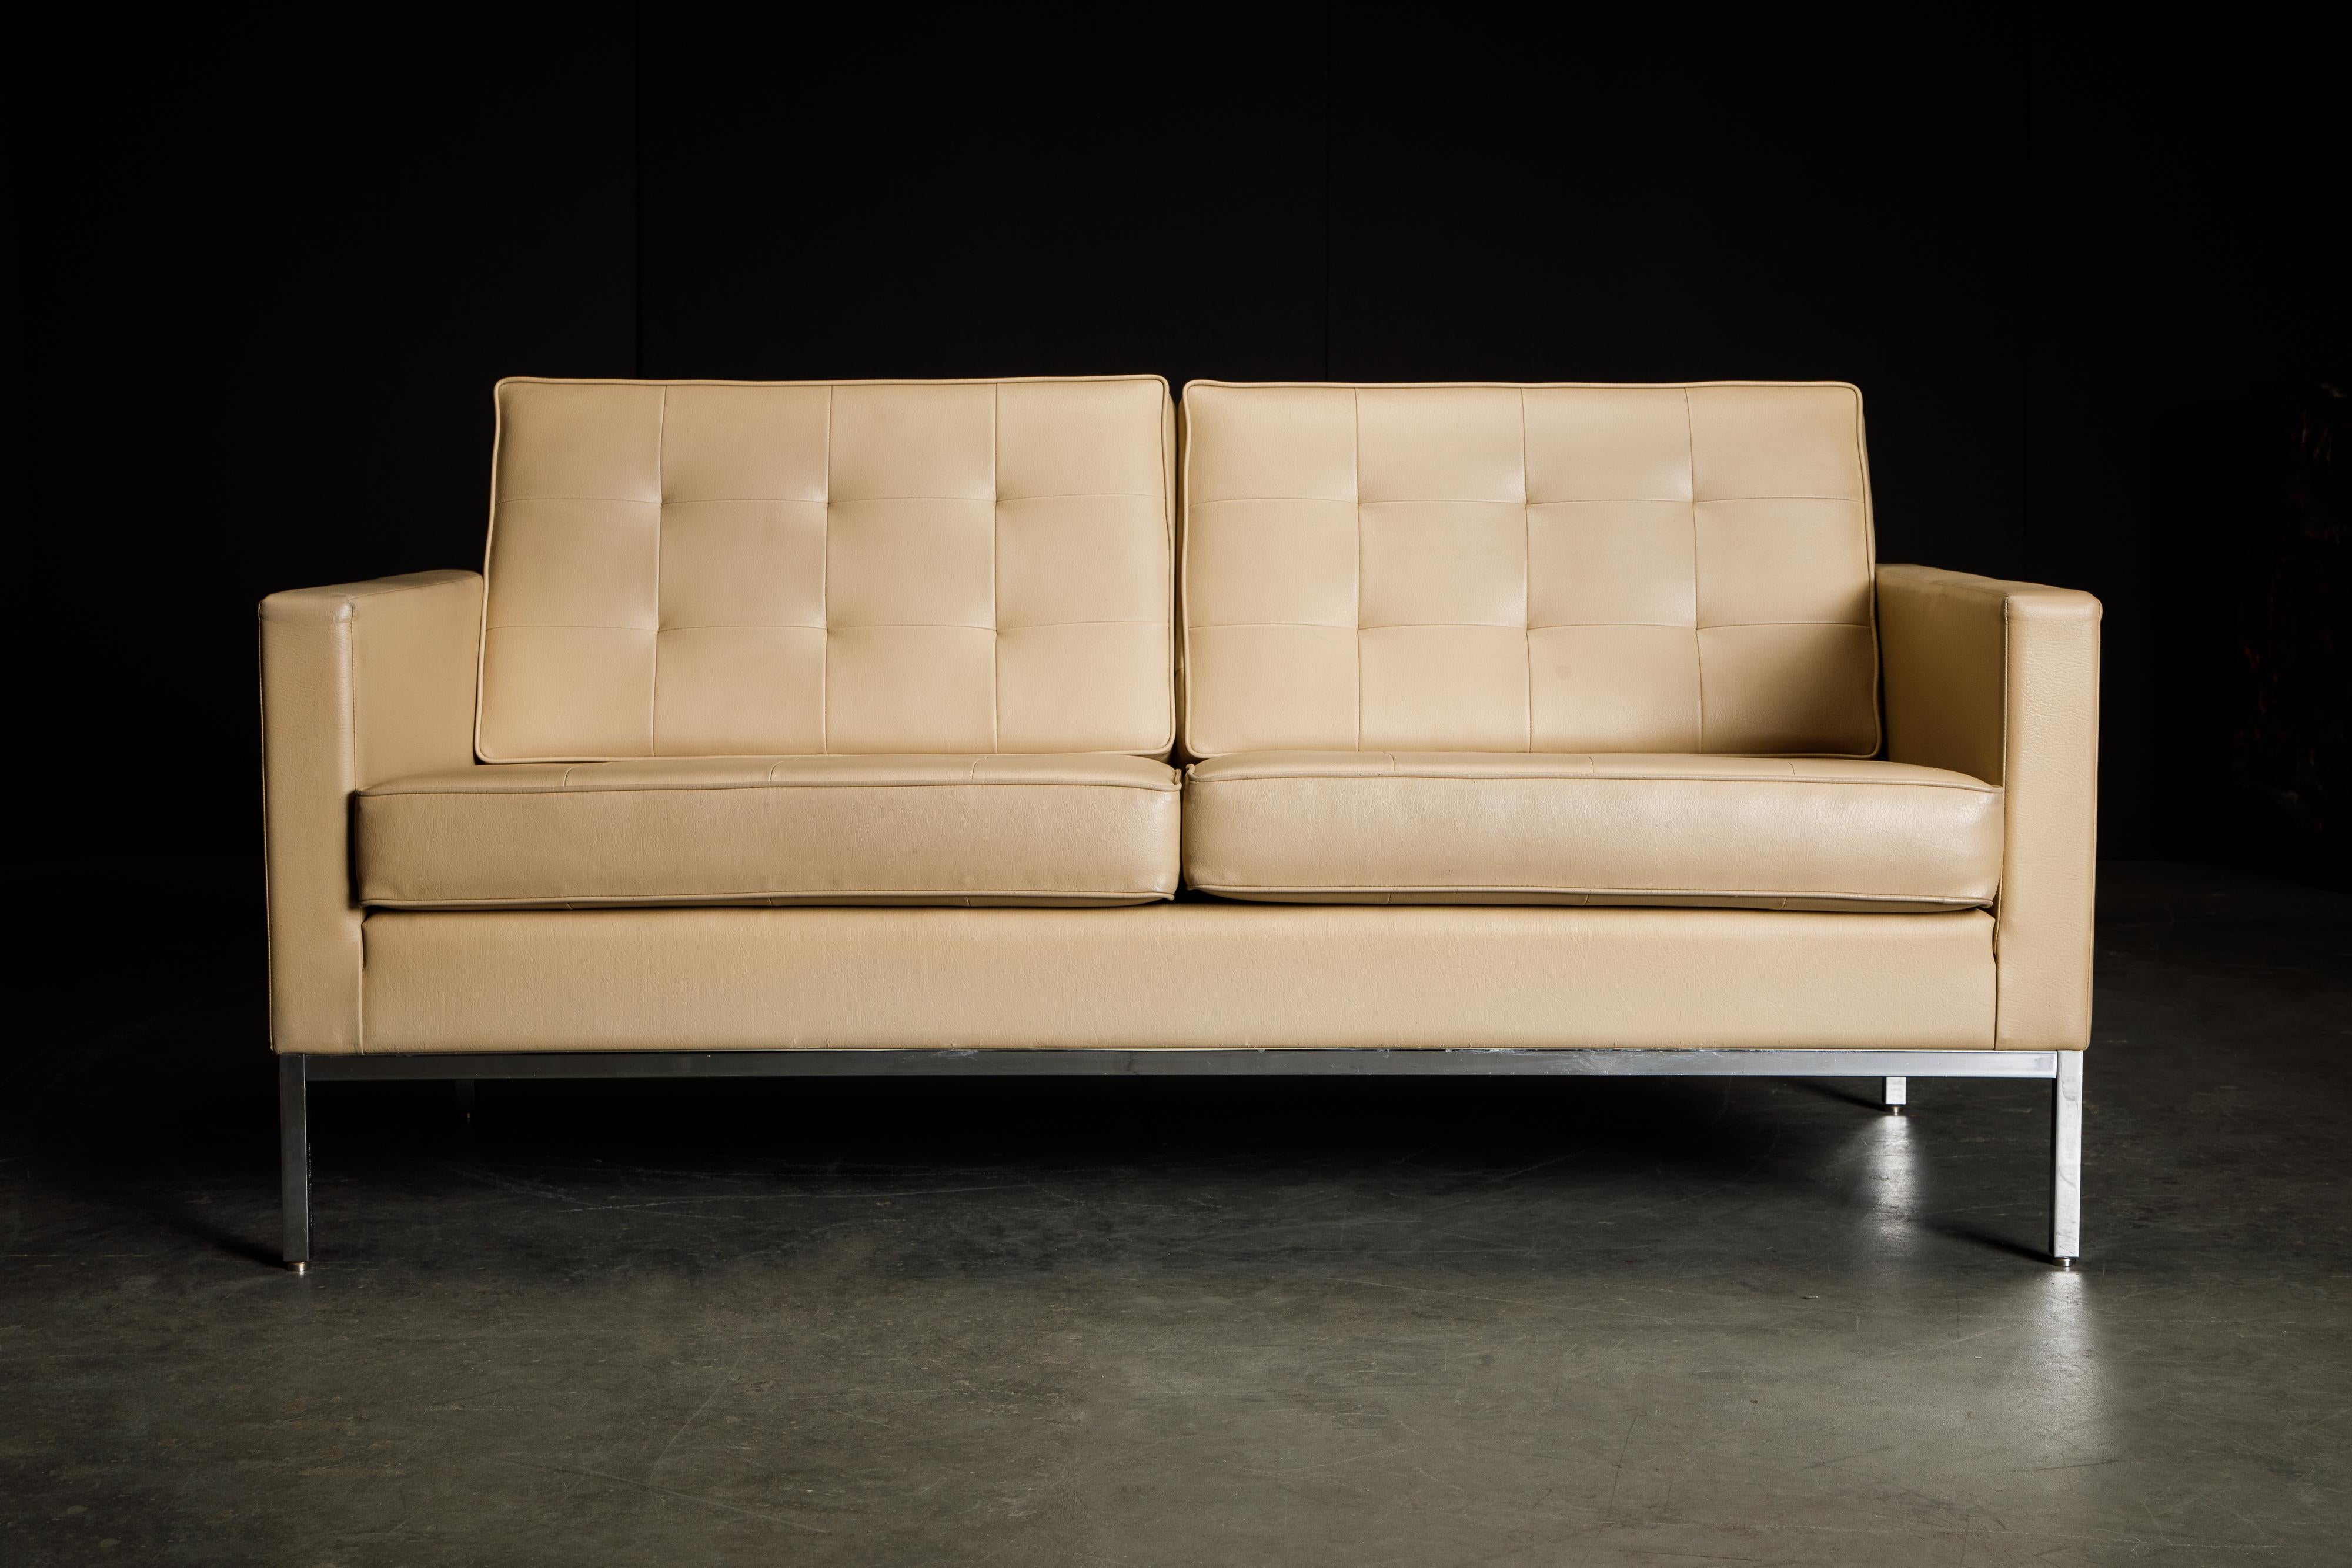 This Florence Knoll leather settee for Knoll Studio features soft supple Spinneybeck leather over a chrome base, signed with Knoll Studio logo and Florence Knoll's signature embossed on one leg, and Knoll repeat fabric on the underside of the seat